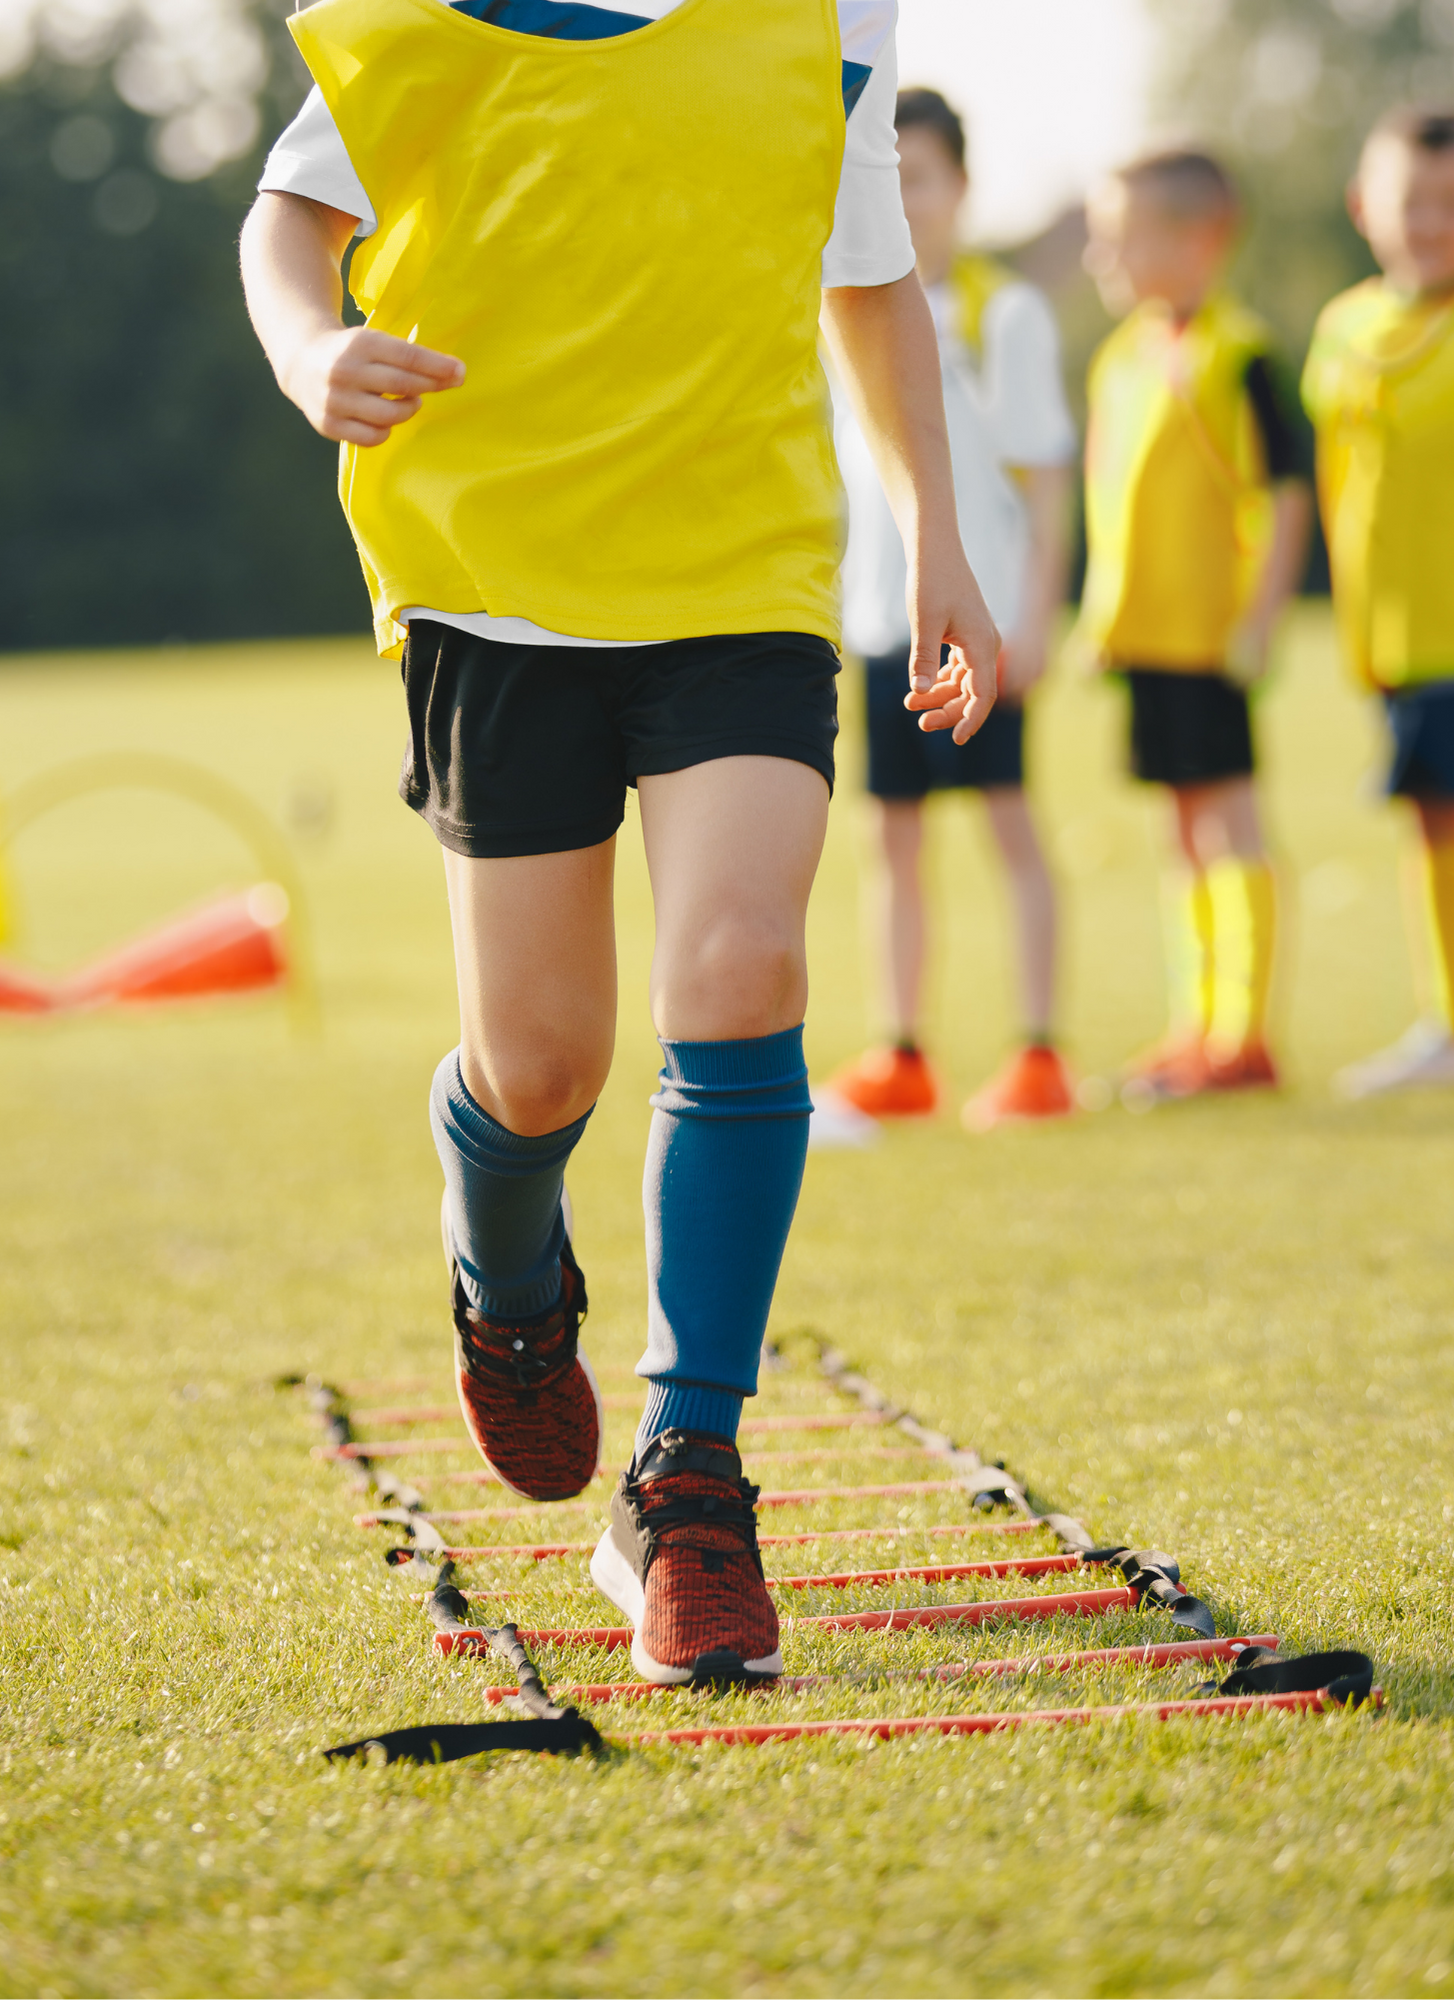 Young athlete doing a ladder drill in Agility Training